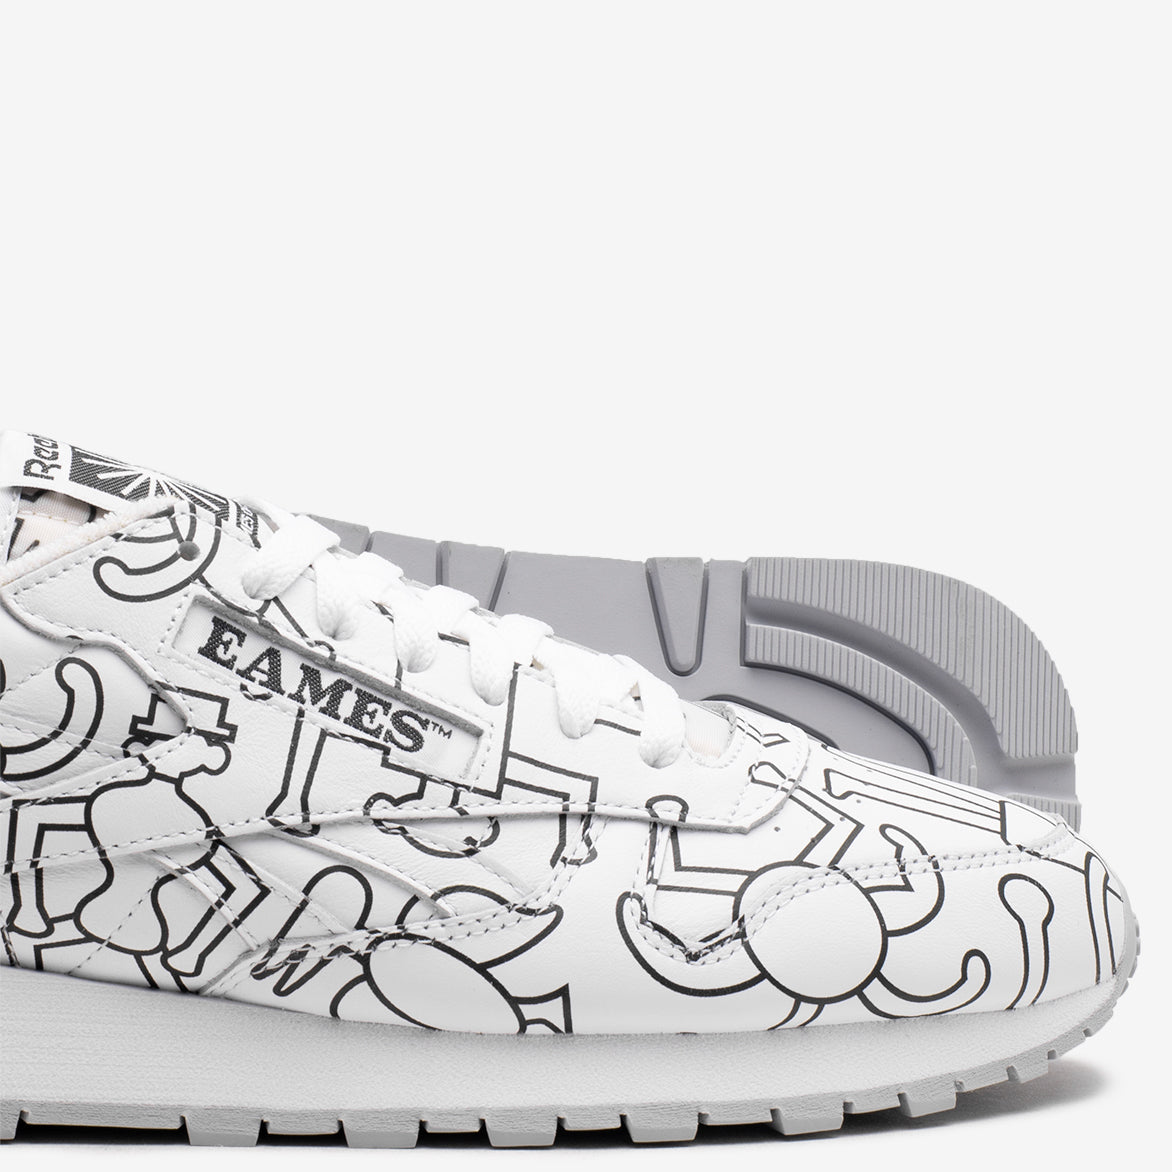 EAMES OFFICE X REEBOK CLASSIC LEATHER "THE COLOURING TOY"